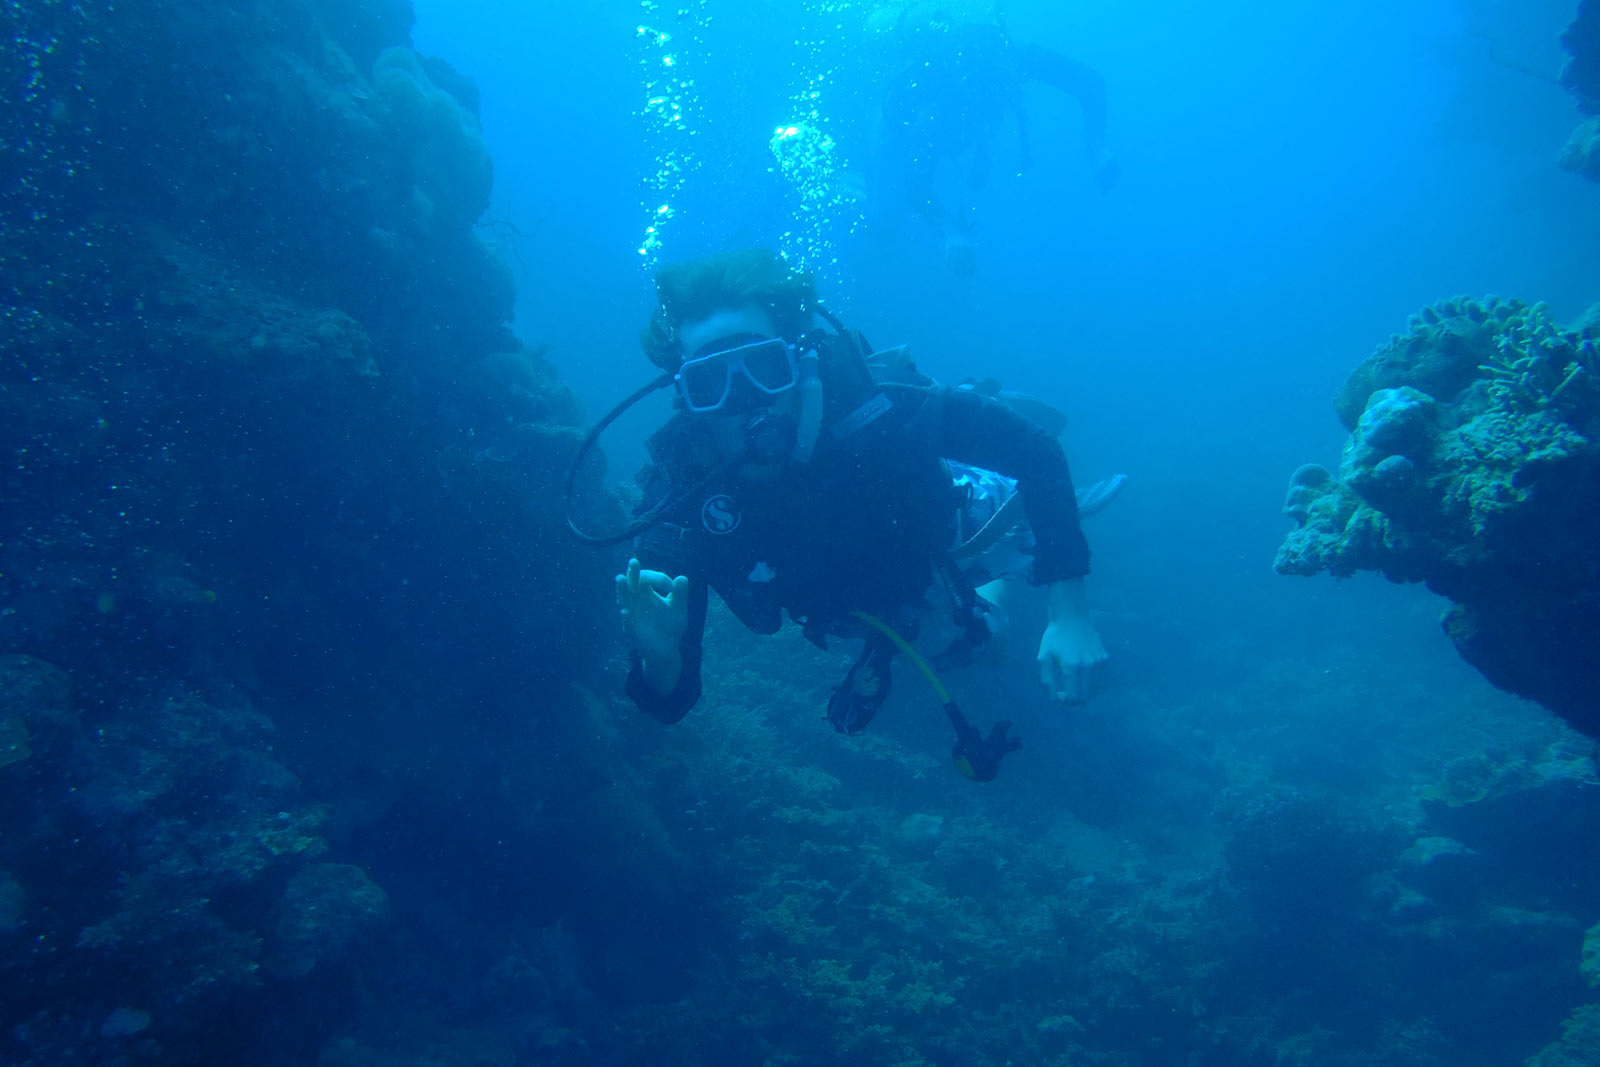 David Simpson diving in The Great Barrier Reef. The ’11 Oz Photo Series